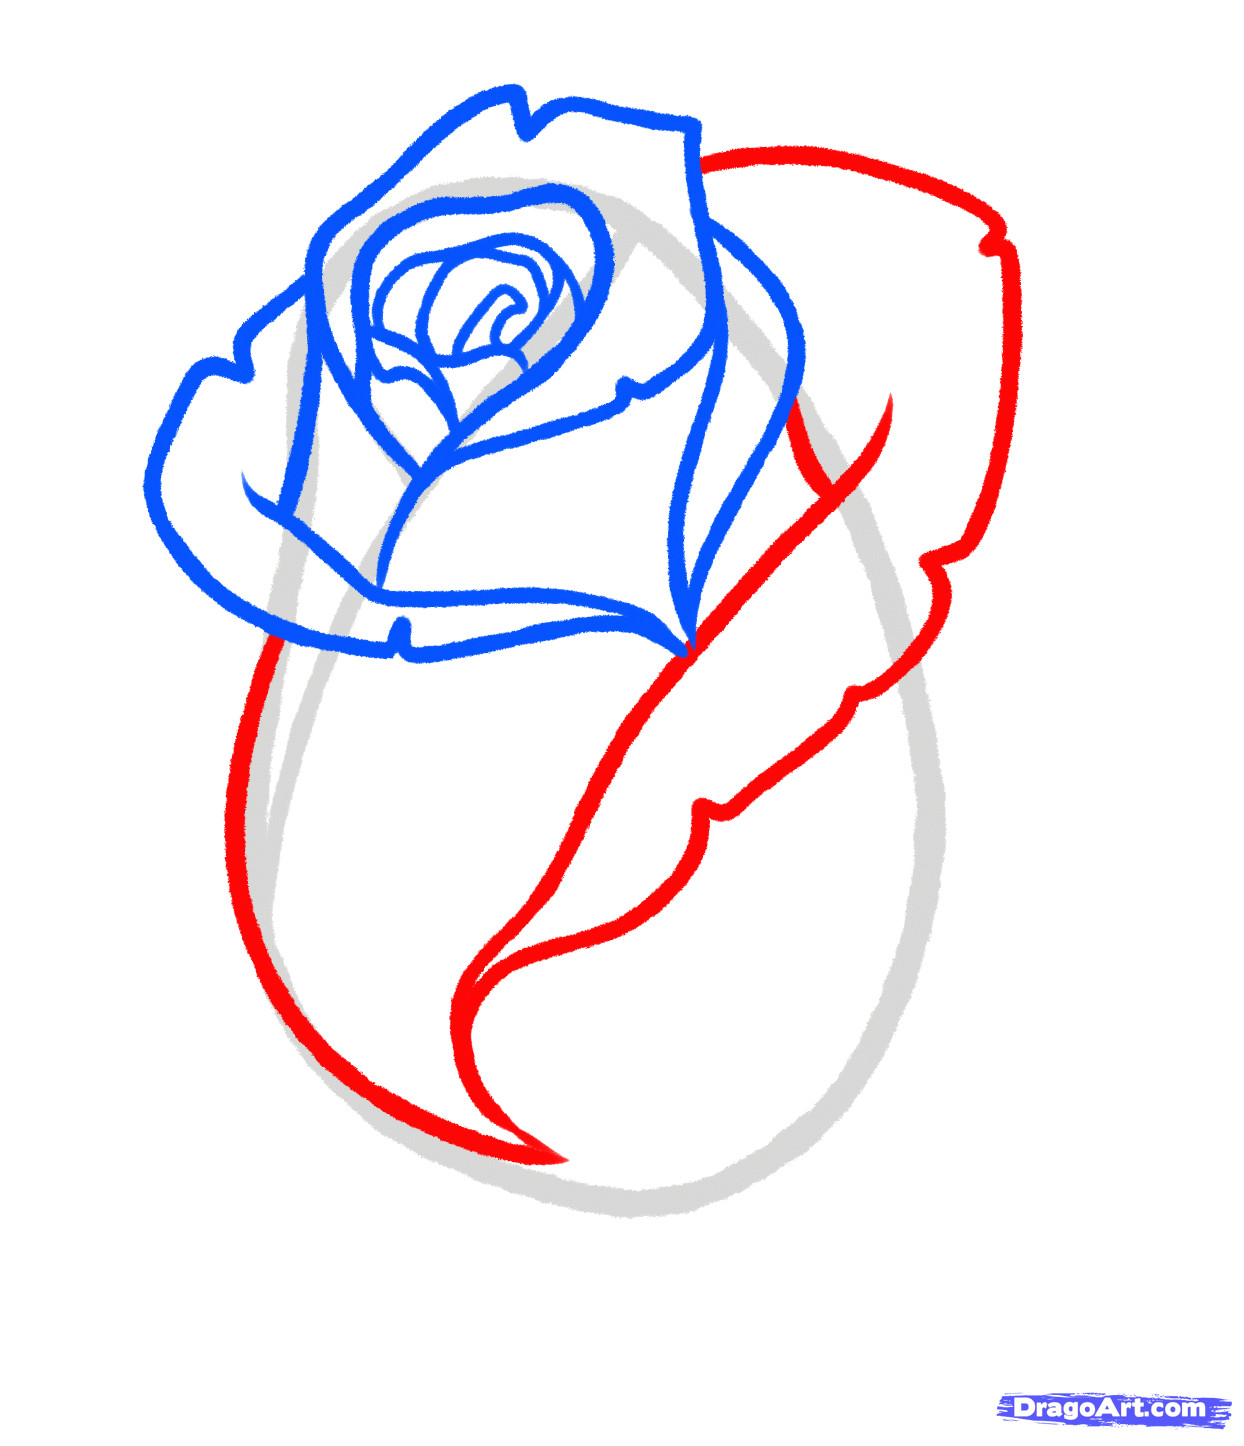 Tutorial for Drawing A Rose How to Draw A Rose Bud Rose Bud Step 5 Sketching Flowers